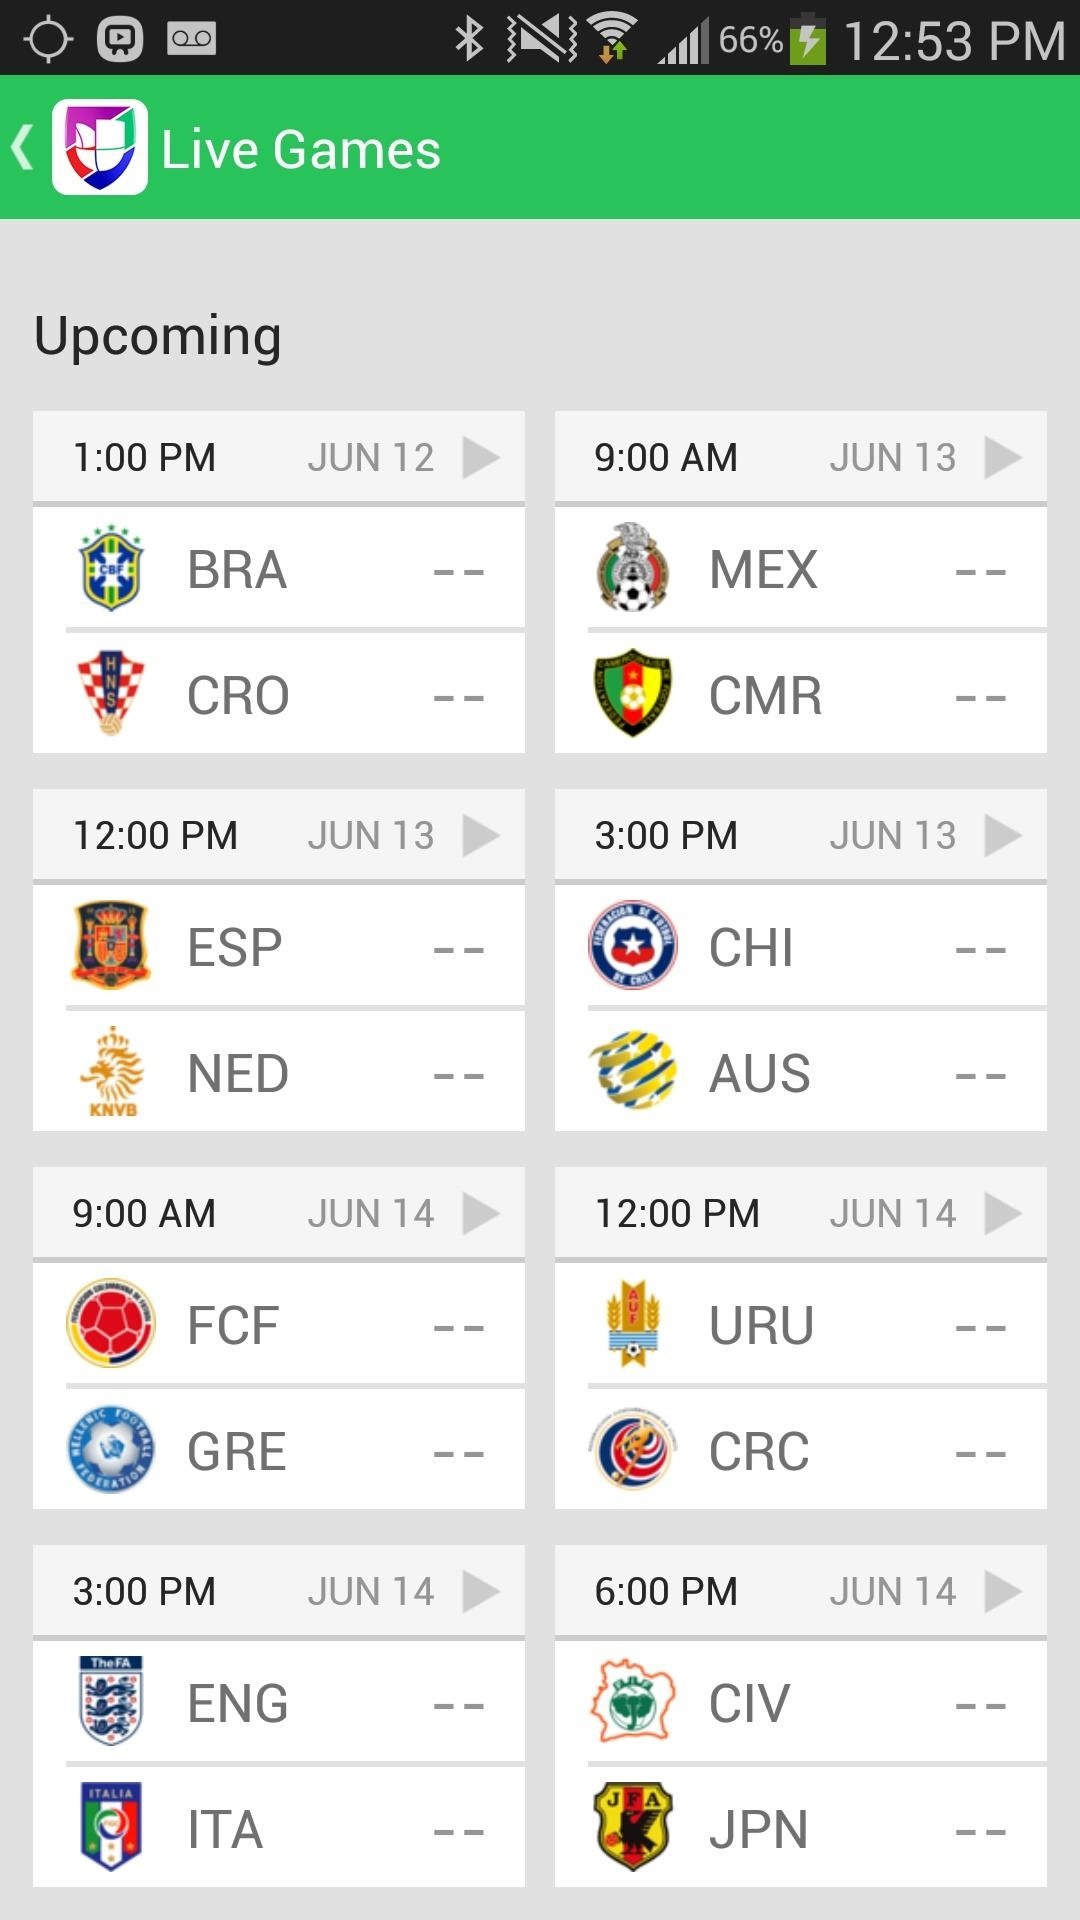 How to Watch the 2014 World Cup Online & on Your Phone—Every Match Streamed Live